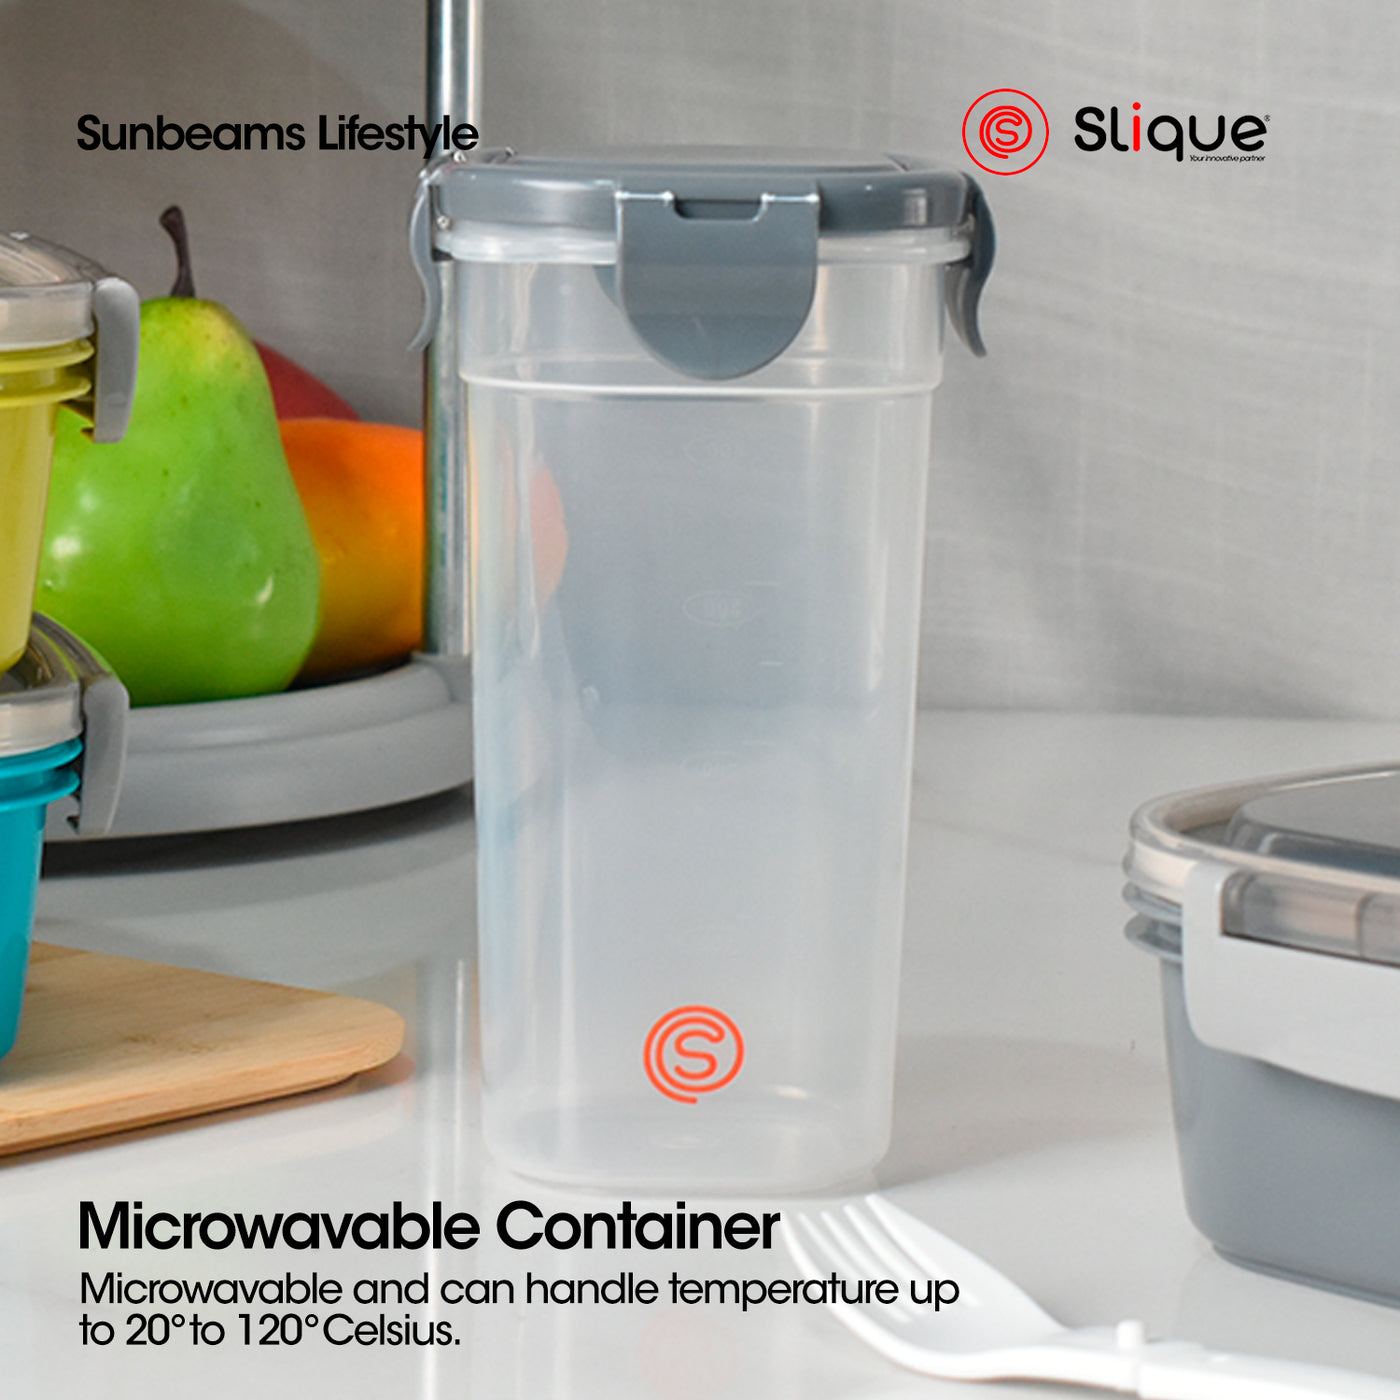 SLIQUE Premium Lunch Box Airtight Microwave Safe Set of 2 Amazing Gift Idea For Any Occasion! (Grey)